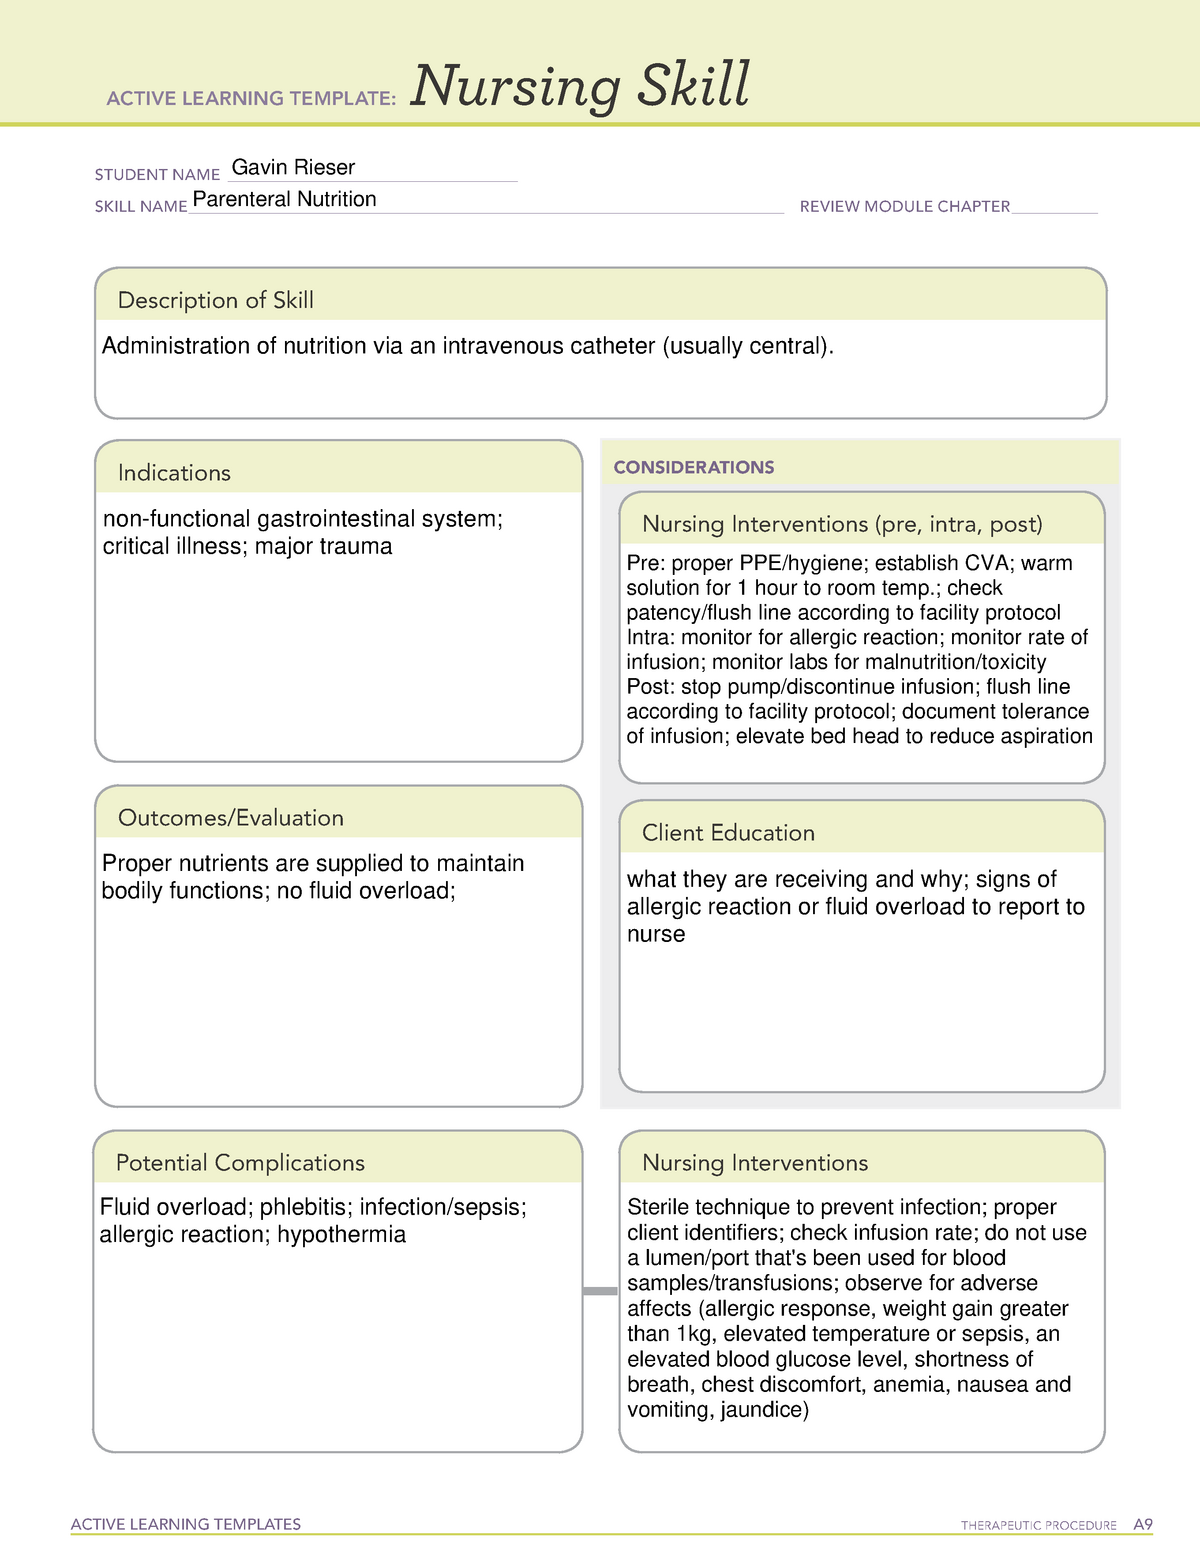 Parenteral Nutrition - ACTIVE LEARNING TEMPLATES THERAPEUTIC PROCEDURE ...